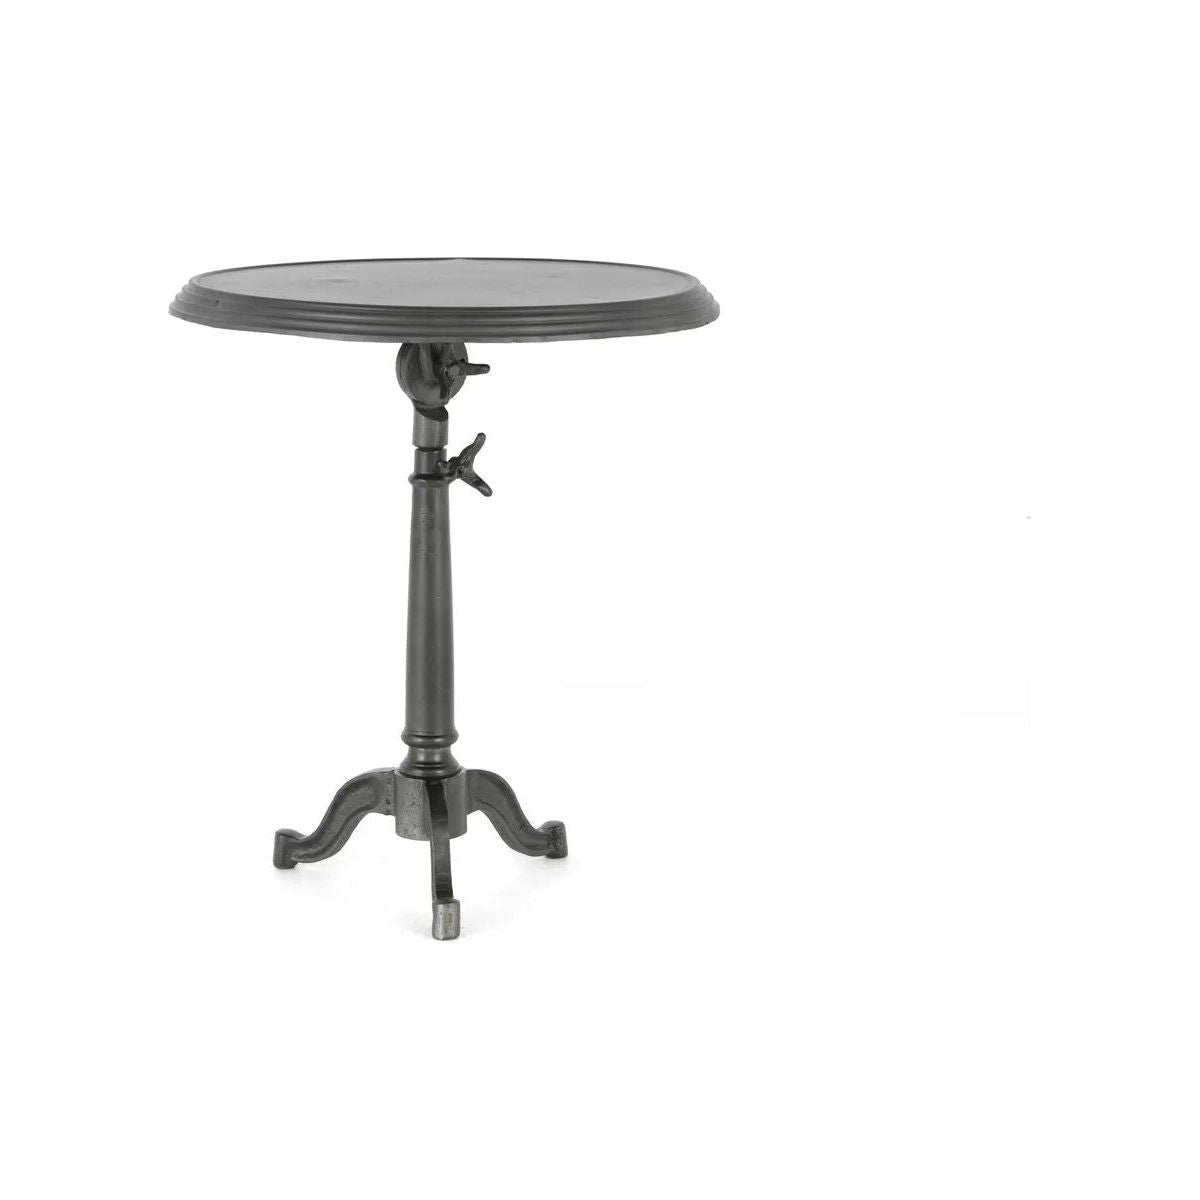 Crafted in iron with a carbon finish, this adjustable table features a versatile top that oscillates, blending classic design with utility.Collection: Rockwel Amethyst Home provides interior design, new home construction design consulting, vintage area rugs, and lighting in the Los Angeles metro area.